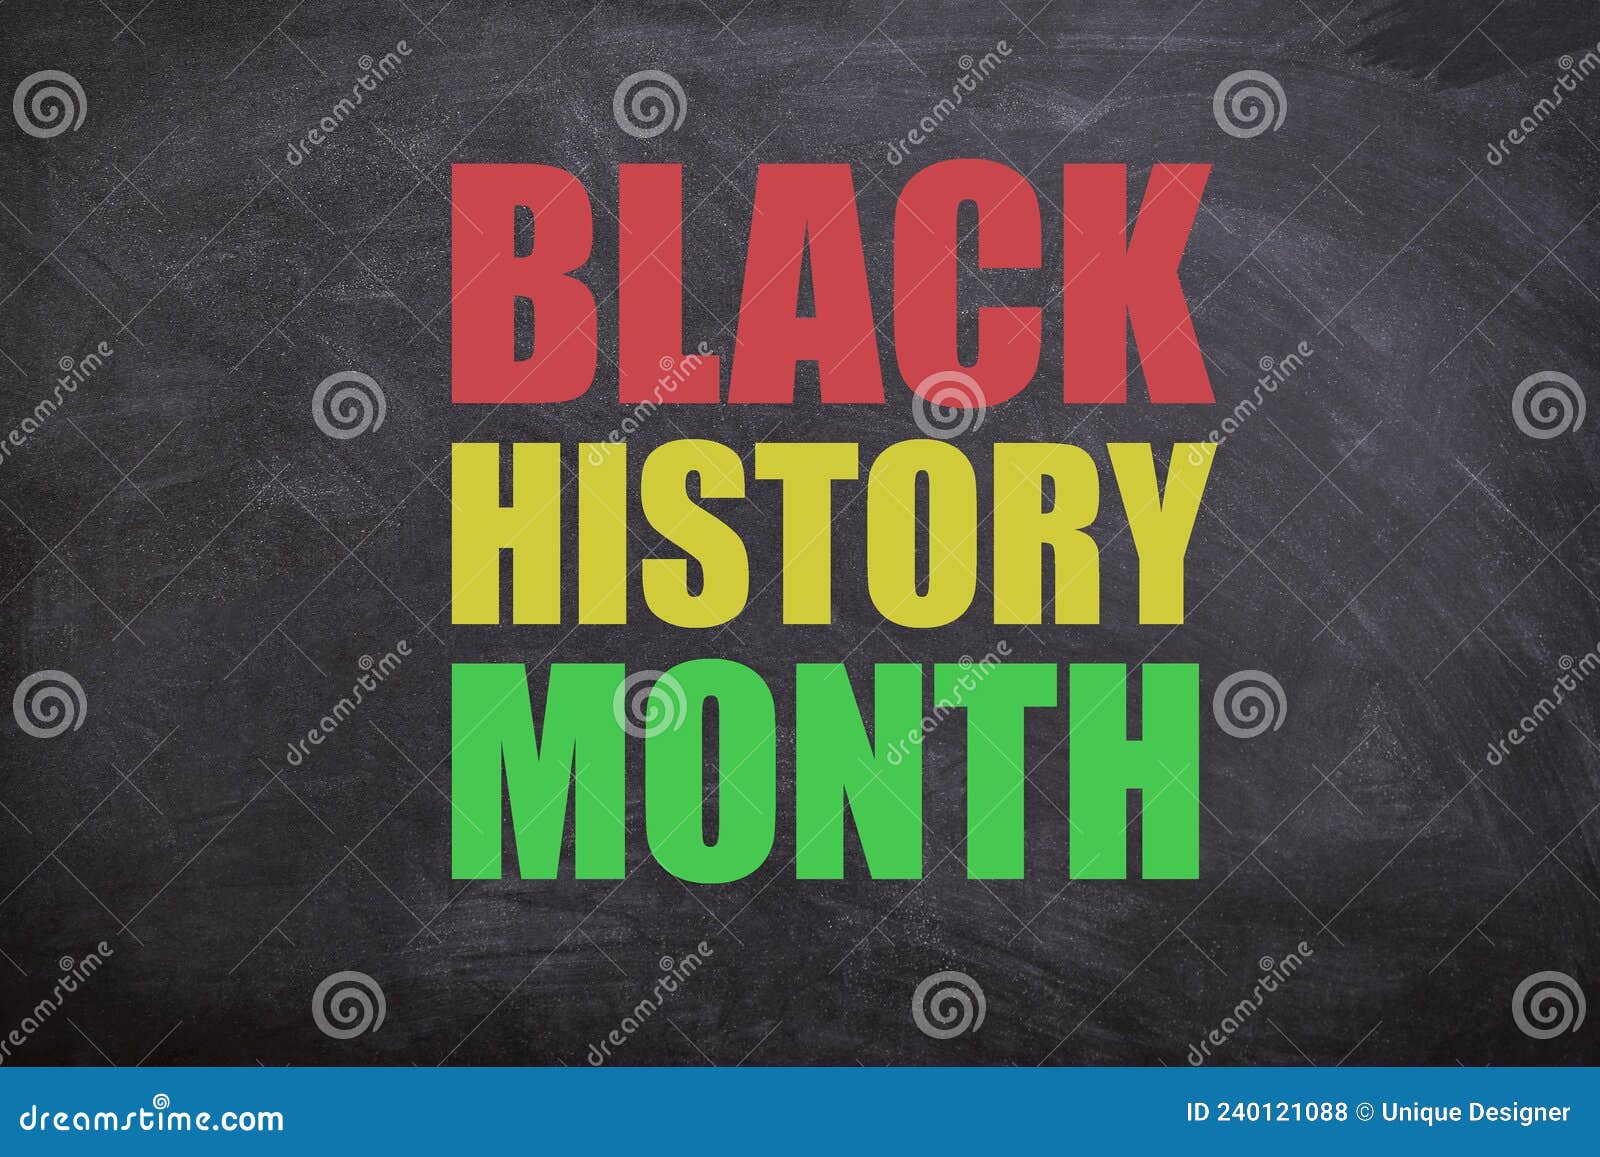 black history month text with black background